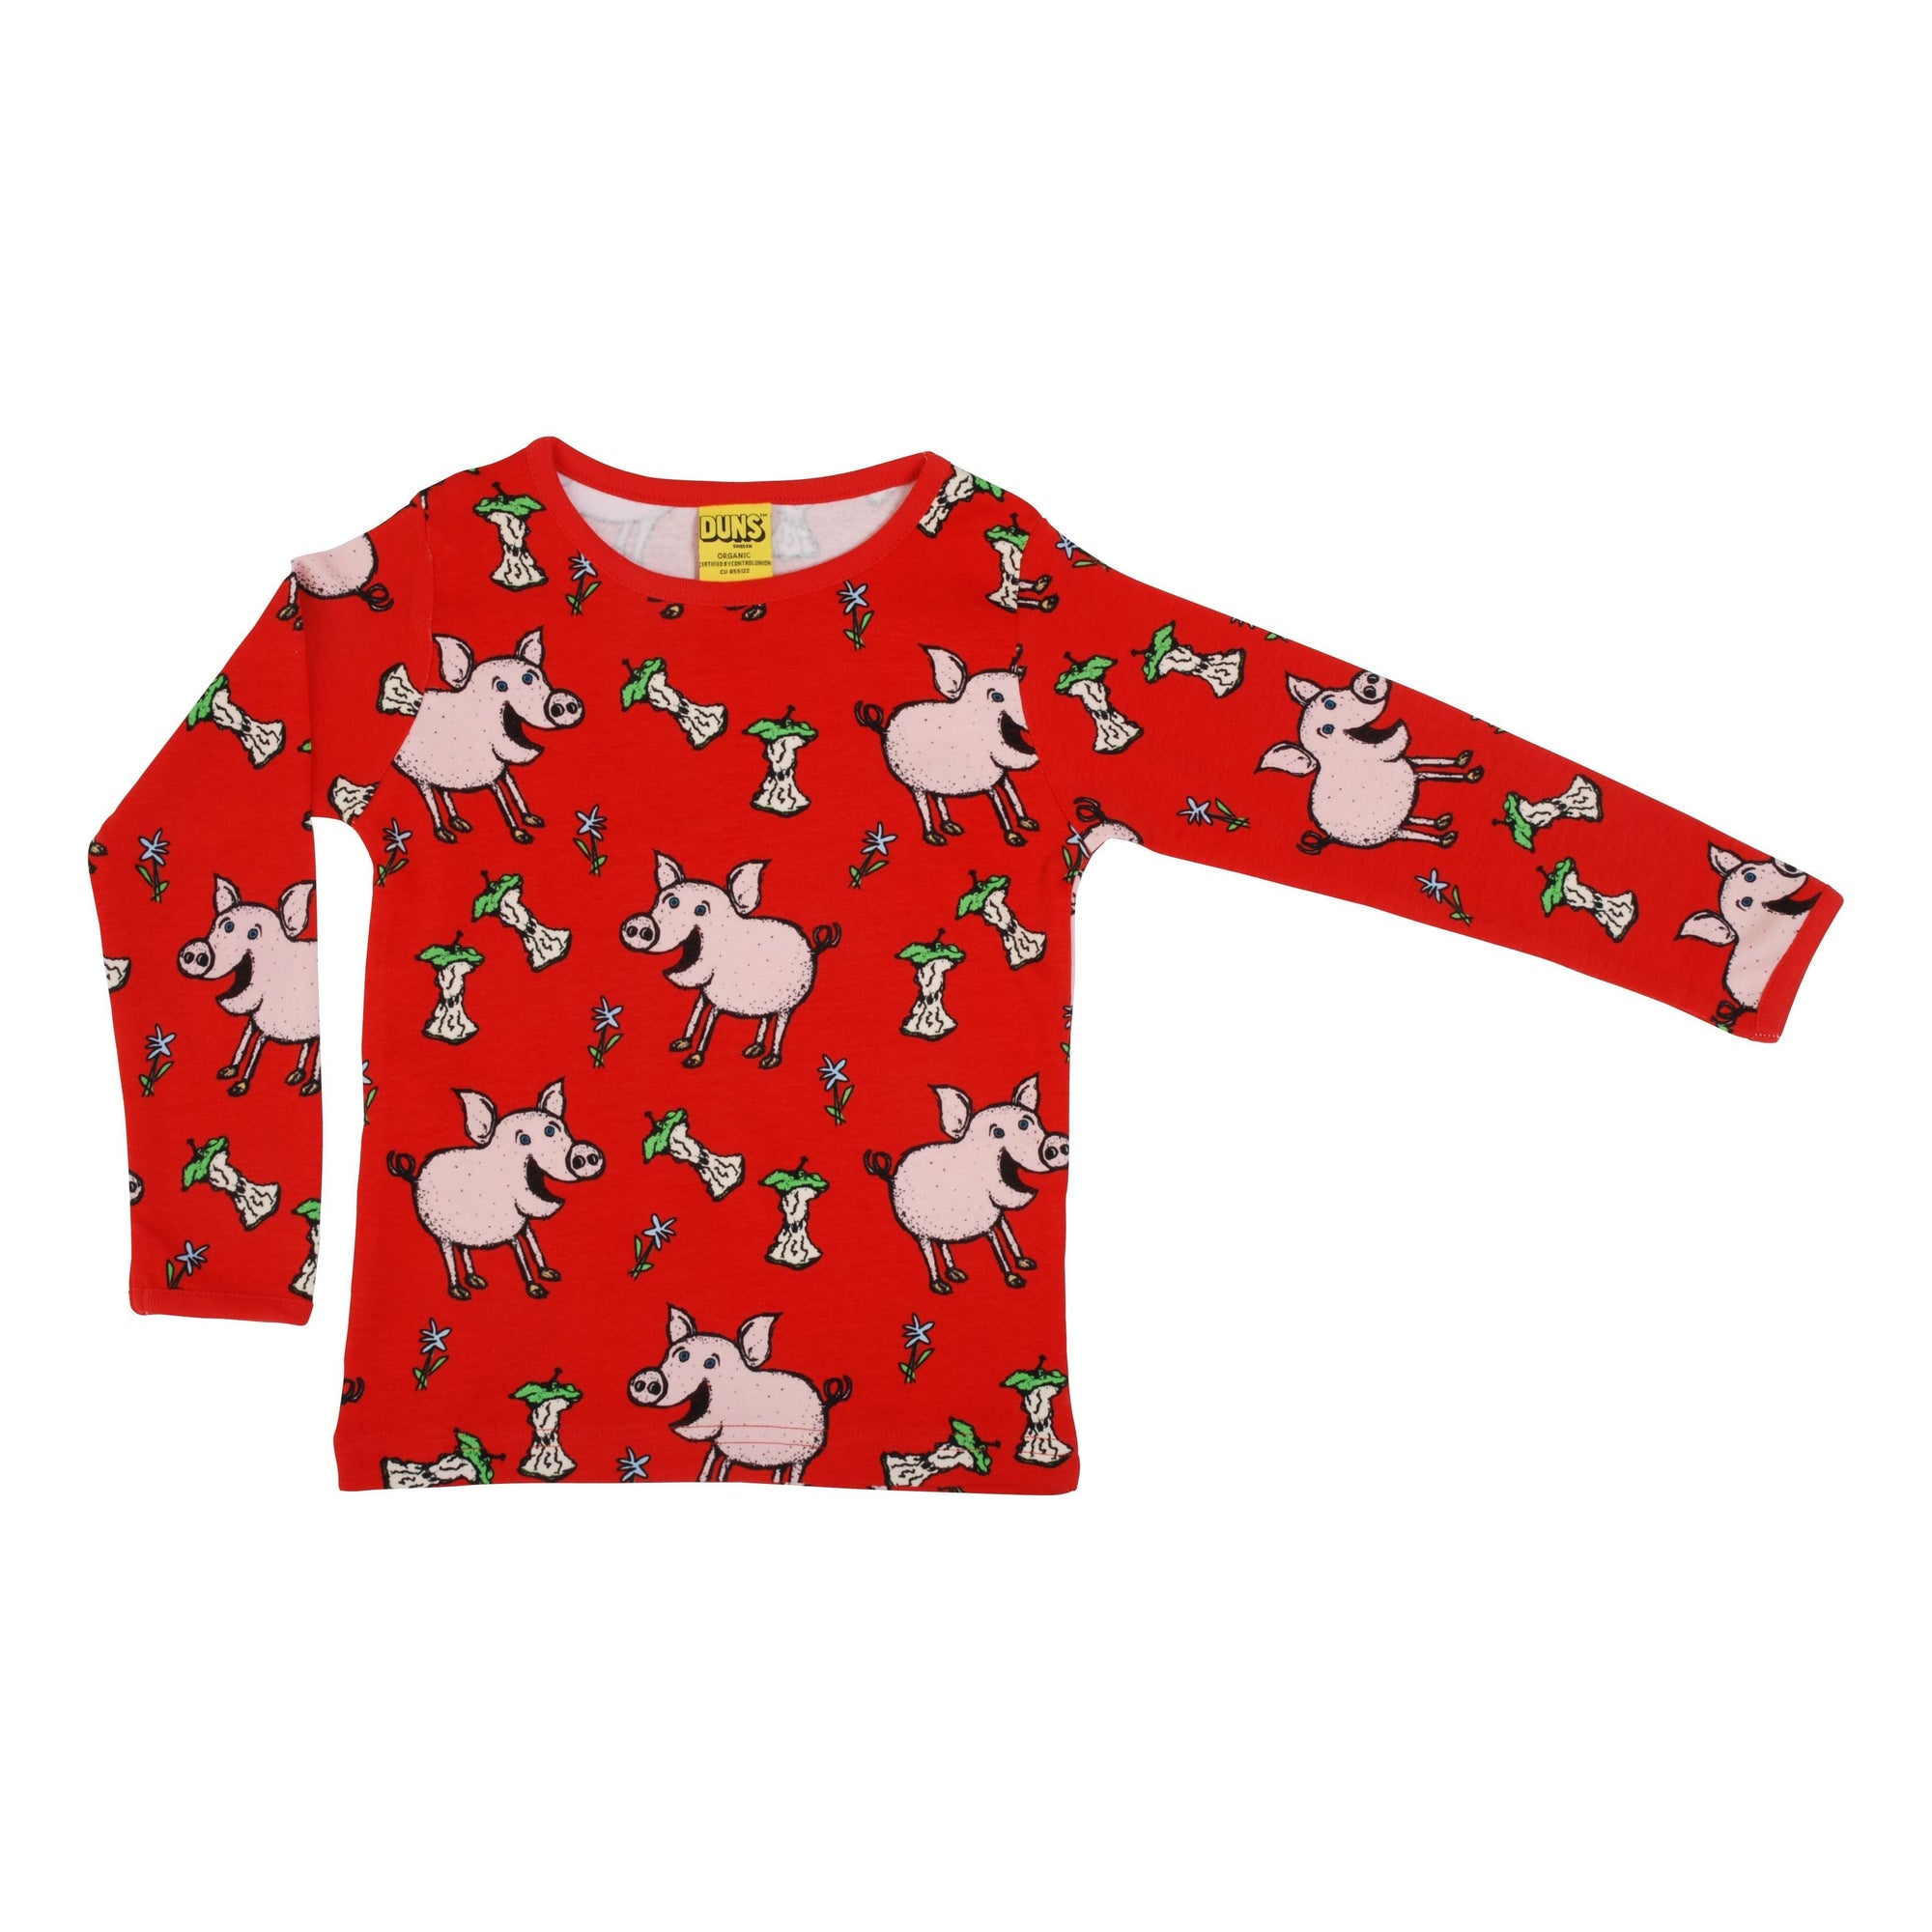 Pigs - Red Long Sleeve Shirt - 2 Left Size 9-10 & 10-11 years-Duns Sweden-Modern Rascals